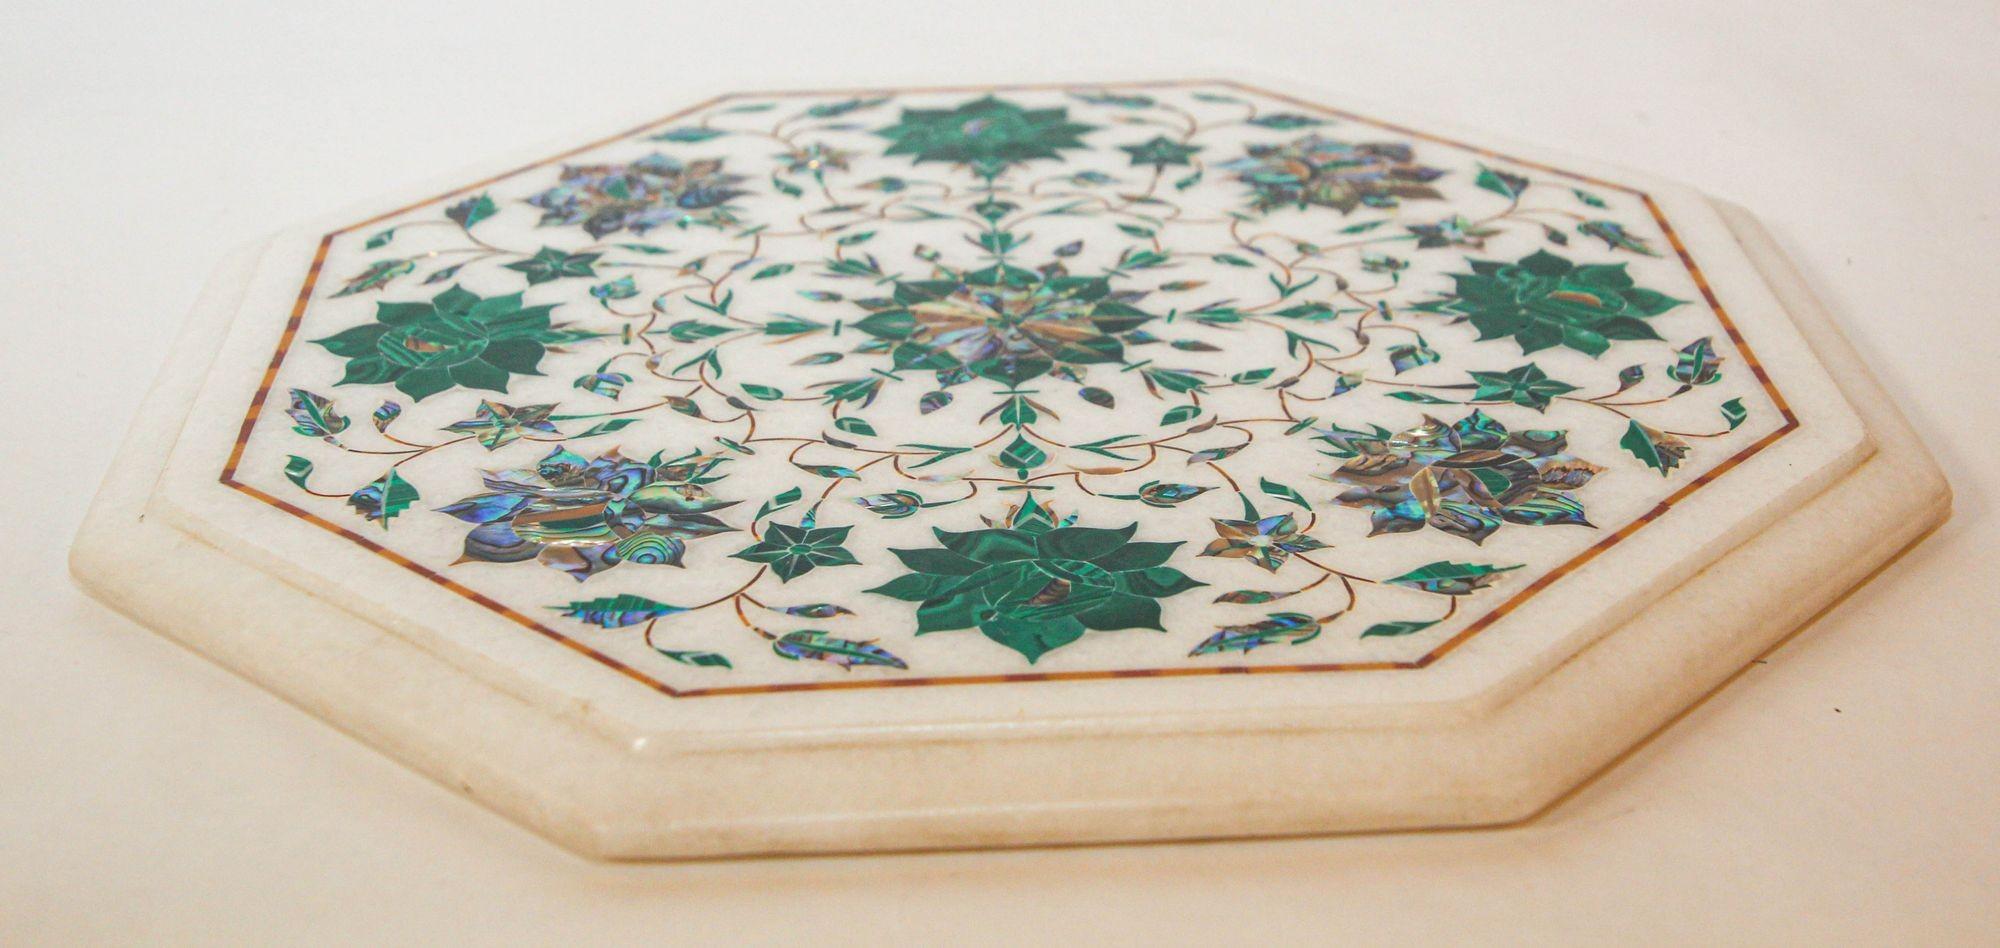 Pietra Dura White Mosaic Octagonal Inlaid Marble Top Handcrafted Agra India 1980 For Sale 3